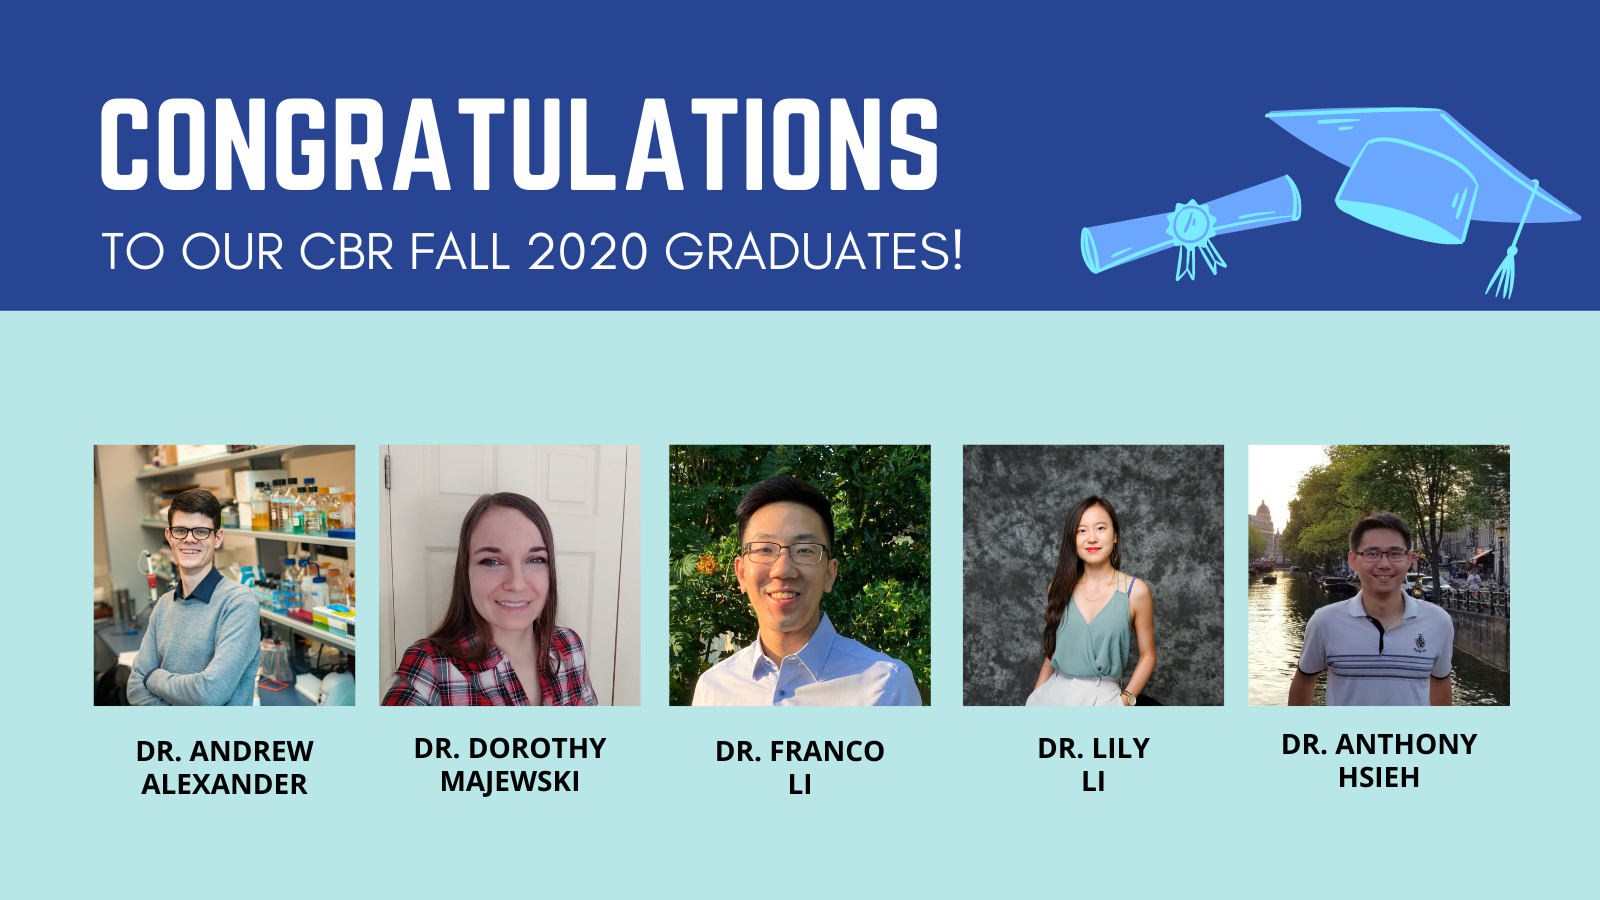 Image of all the CBR's Fall 2020 graduates: Dr. Andrew Alexander, Dr. Dorothy Majewski, Dr. Franco Li, Dr. Lily Li, and Dr. Anthony Hsieh